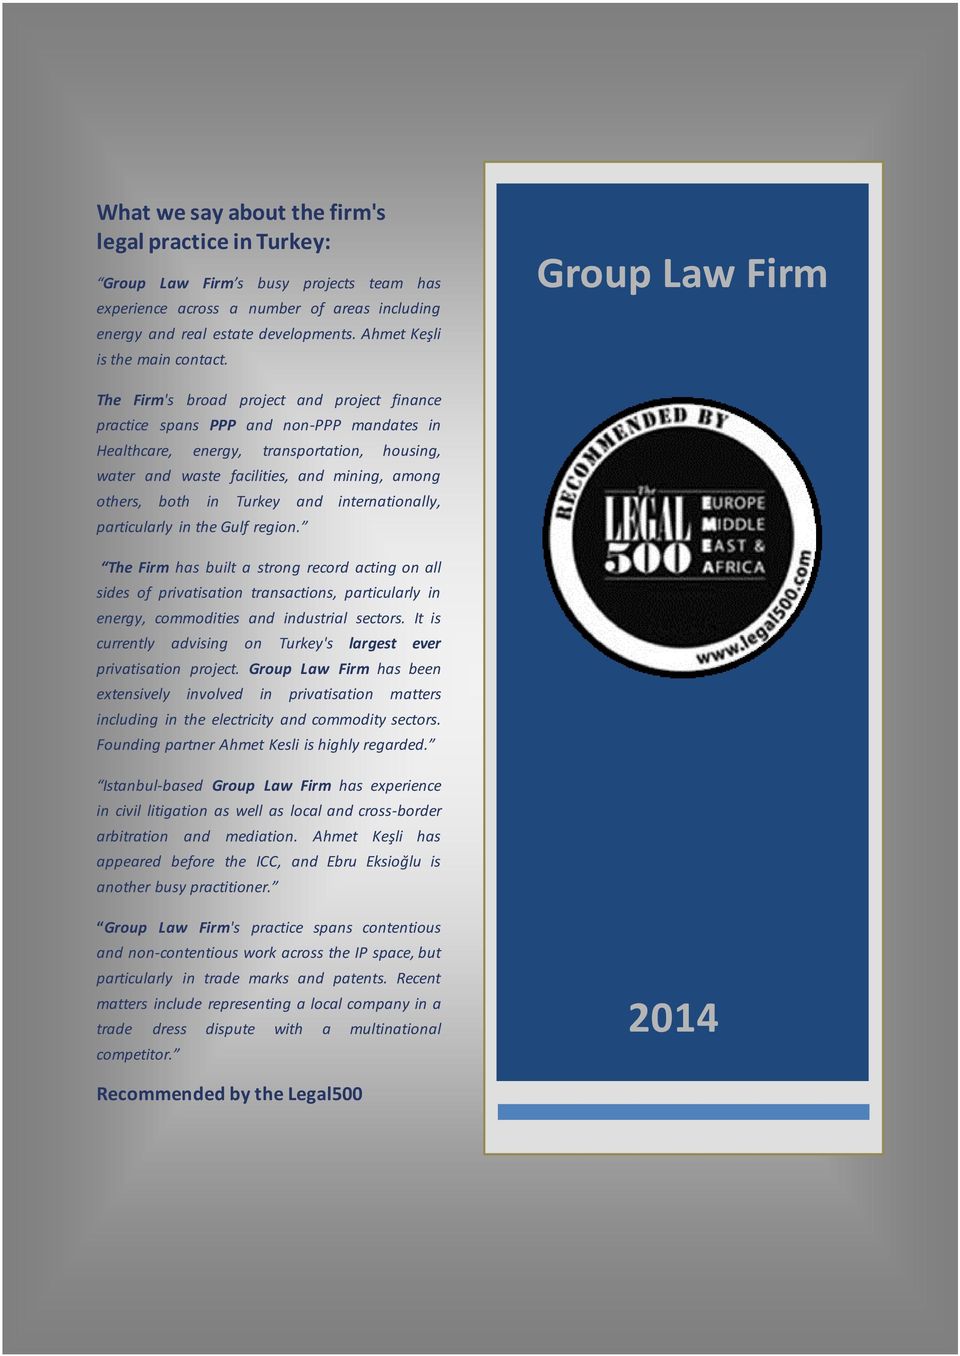 Group Law Firm The Firm's broad project and project finance practice spans PPP and non-ppp mandates in Healthcare, energy, transportation, housing, water and waste facilities, and mining, among